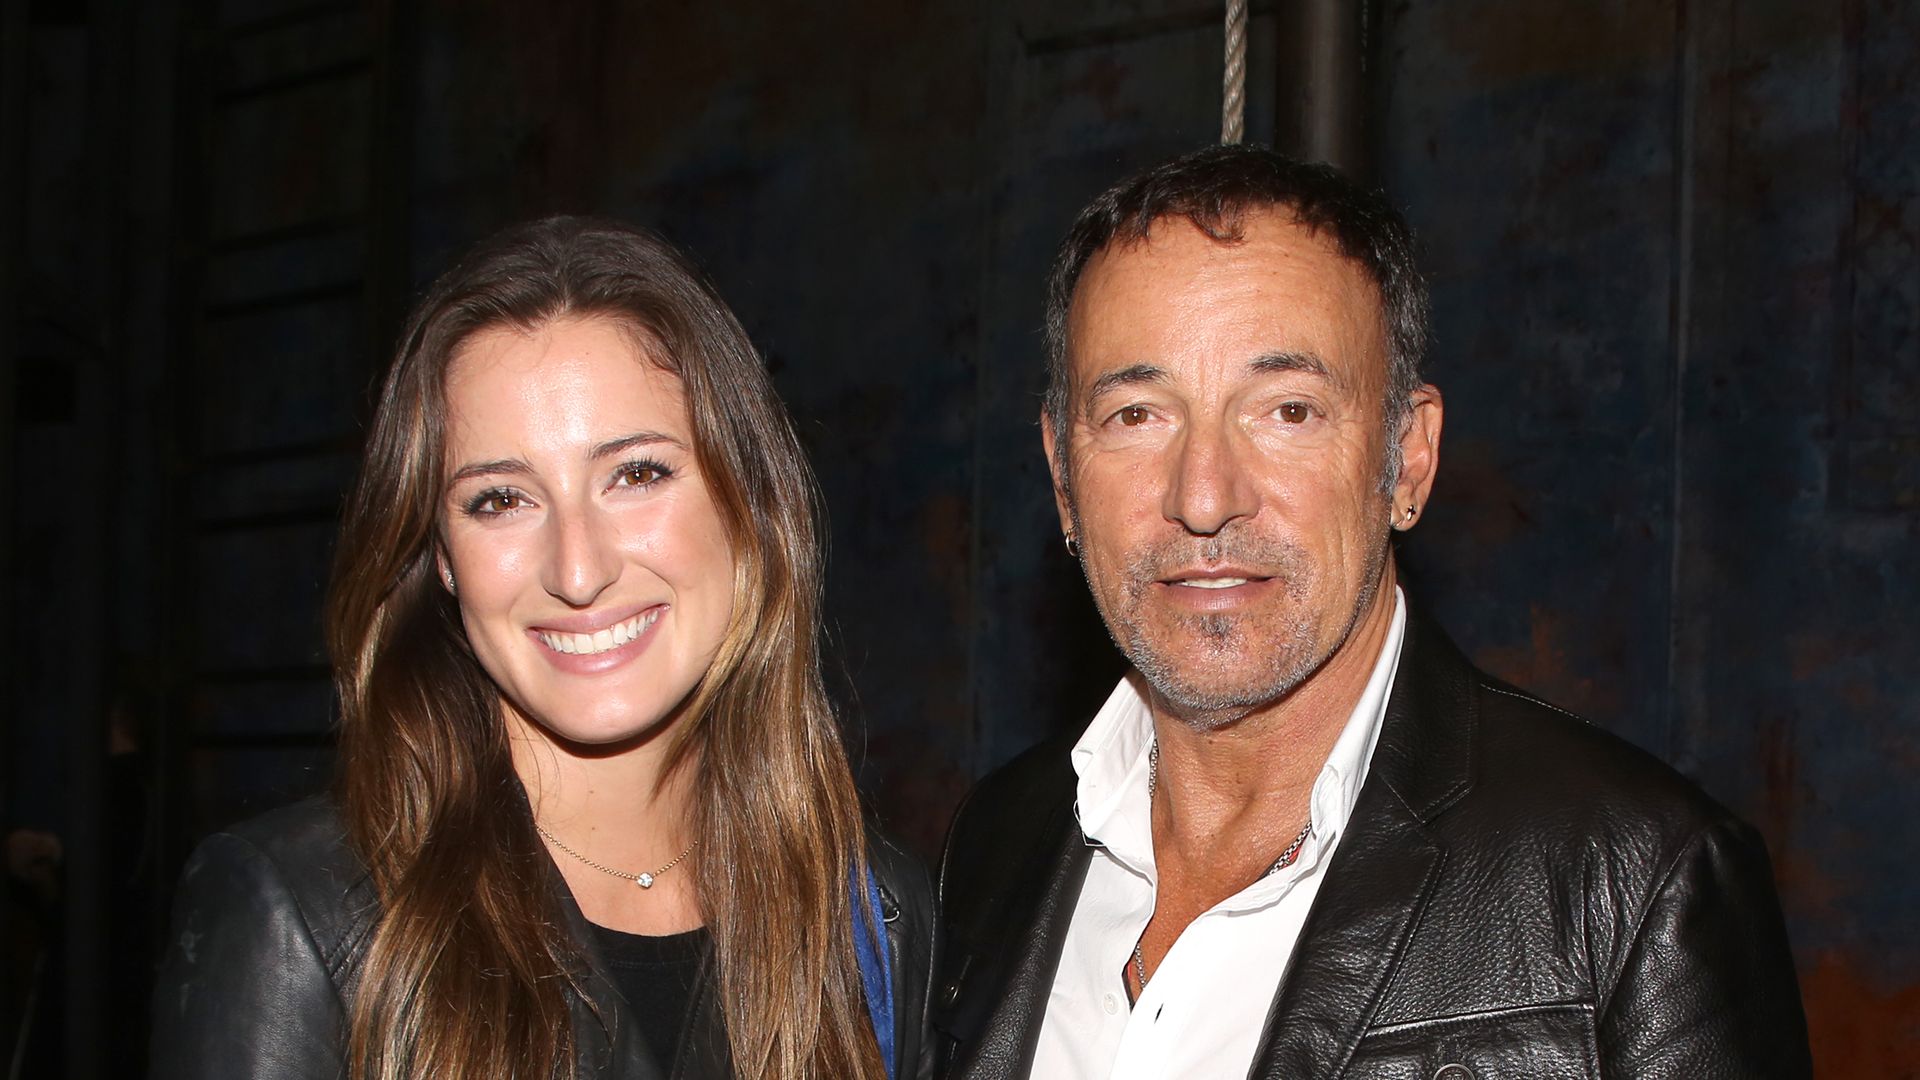 NEW YORK, NY - OCTOBER 15:  Jessica Springsteen and Bruce Springsteen  backstage after a performance of 'The Last Ship' at the Neil Simon Theatre on October 15, 2014 in New York City.  (Photo by Walter McBride/Getty Images)